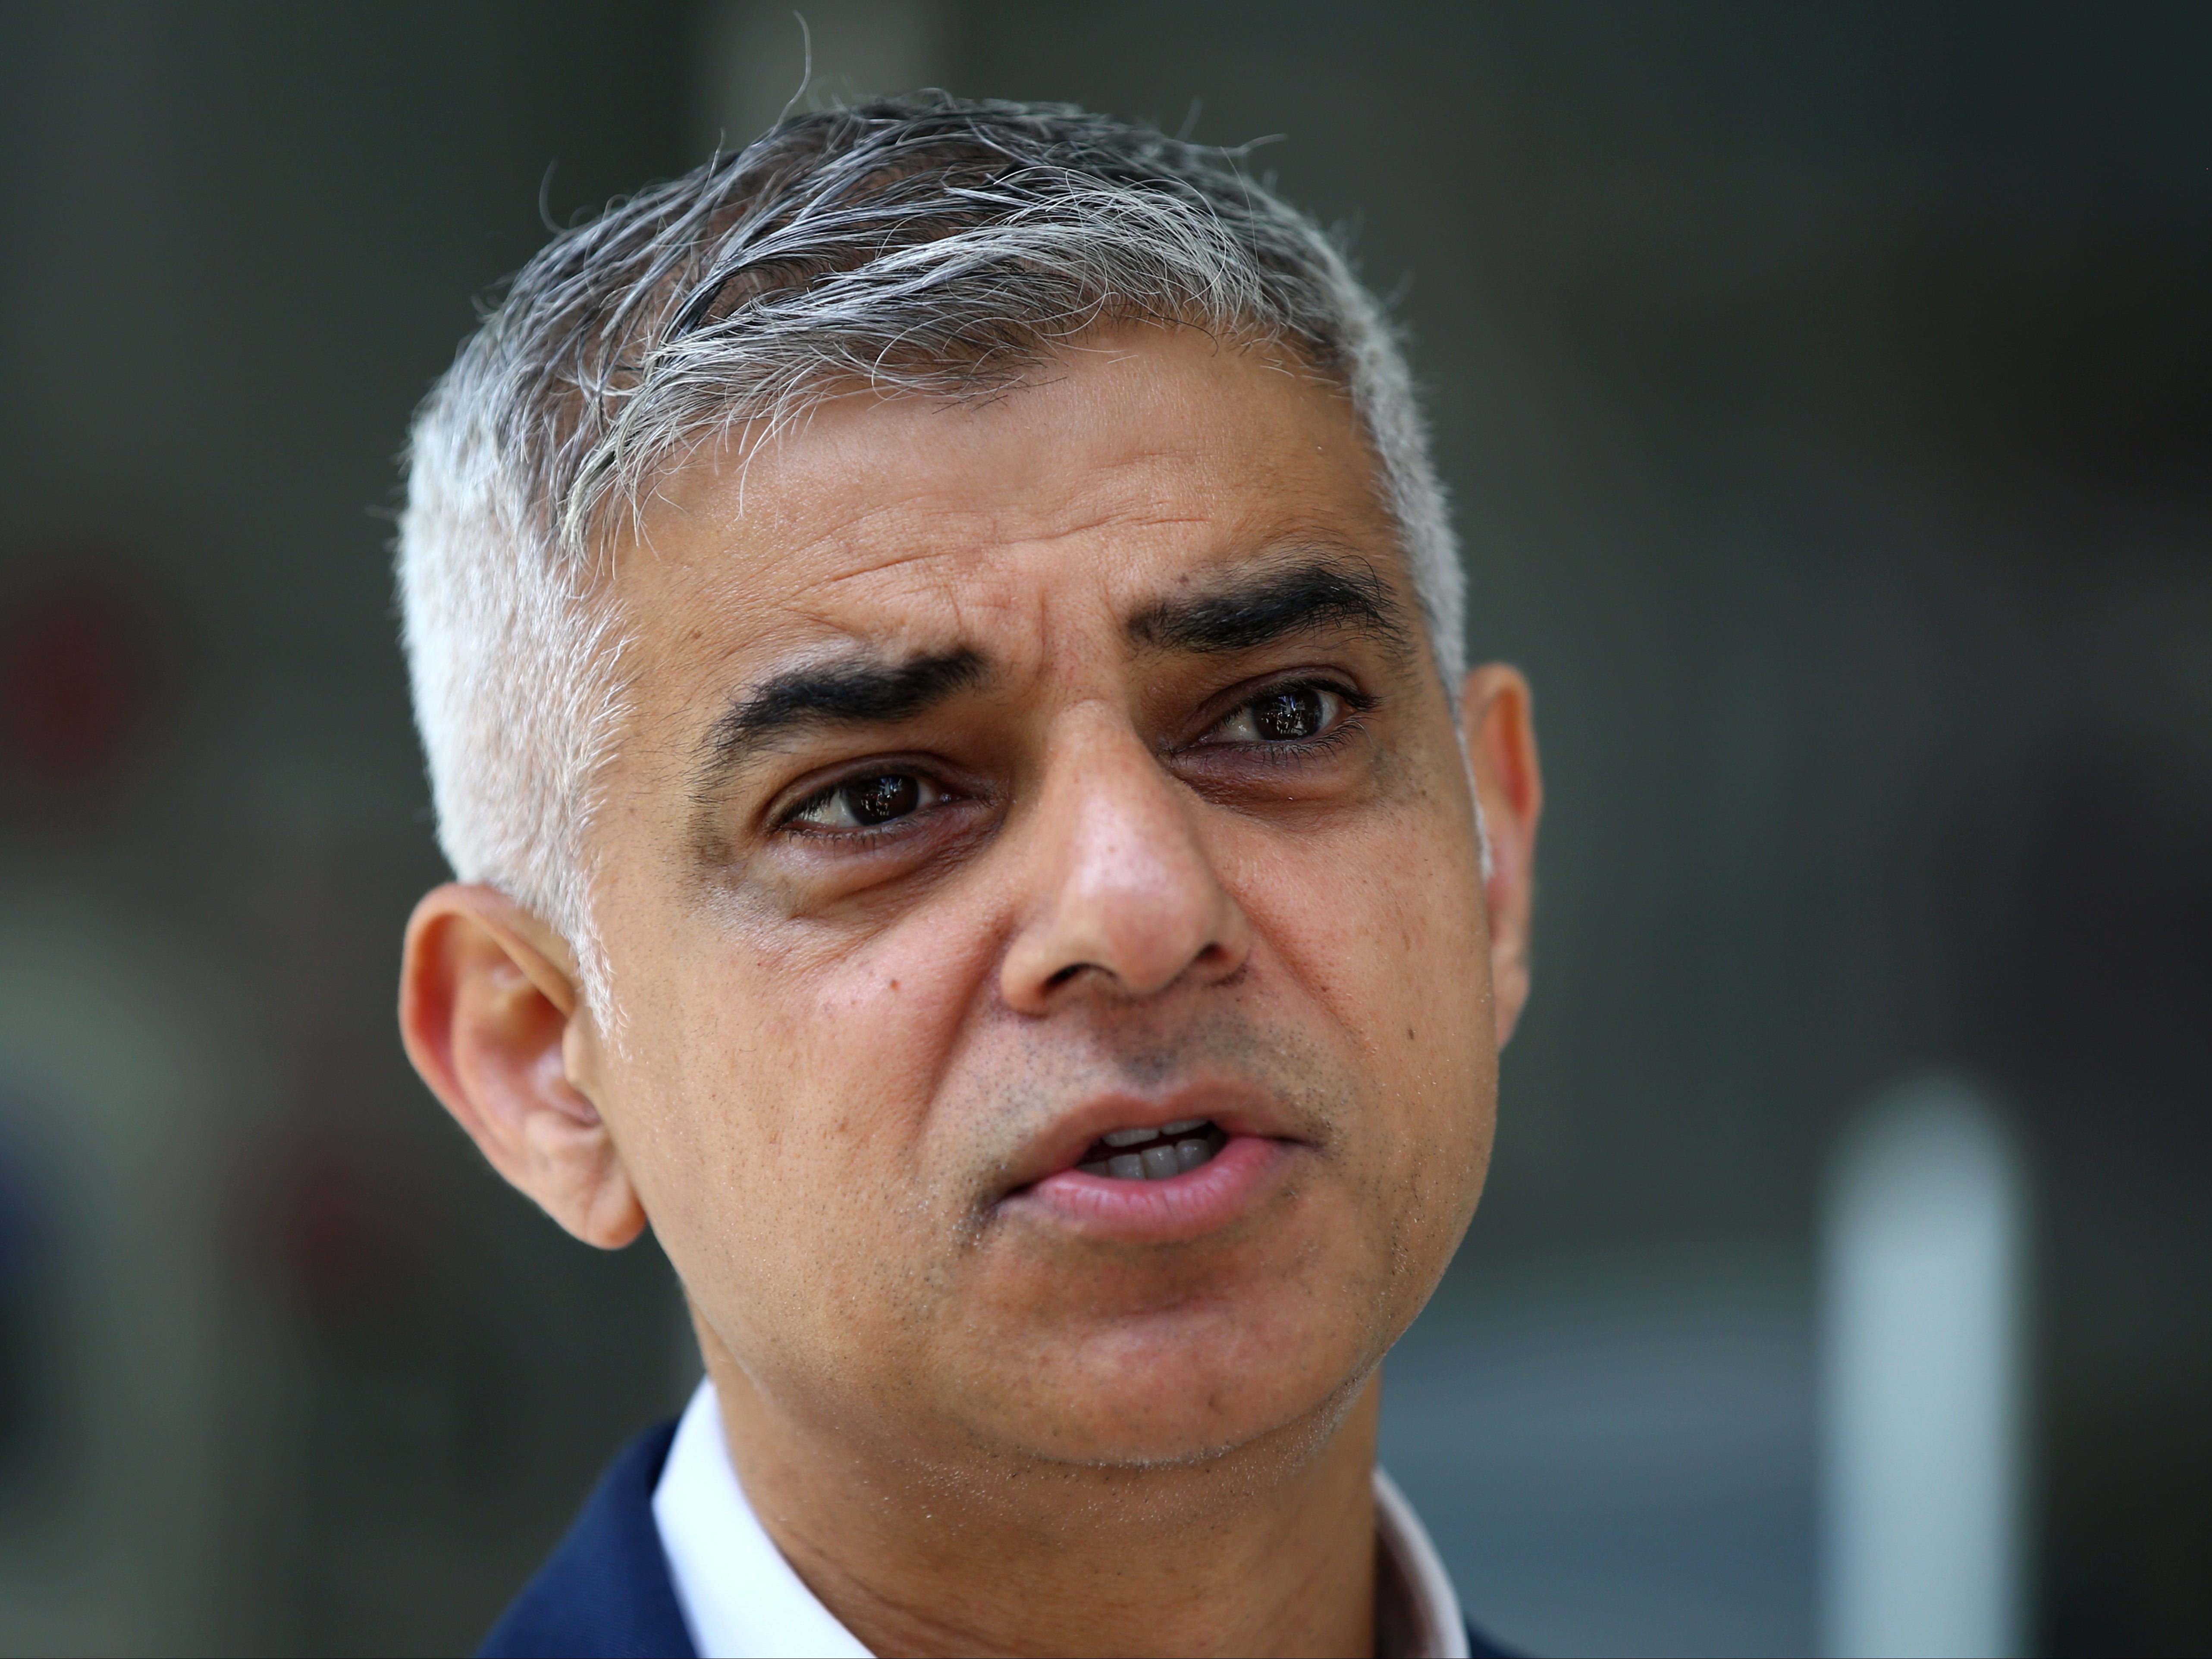 Sadiq Khan has called for more support for families of primary school pupils during the cost of living crisis